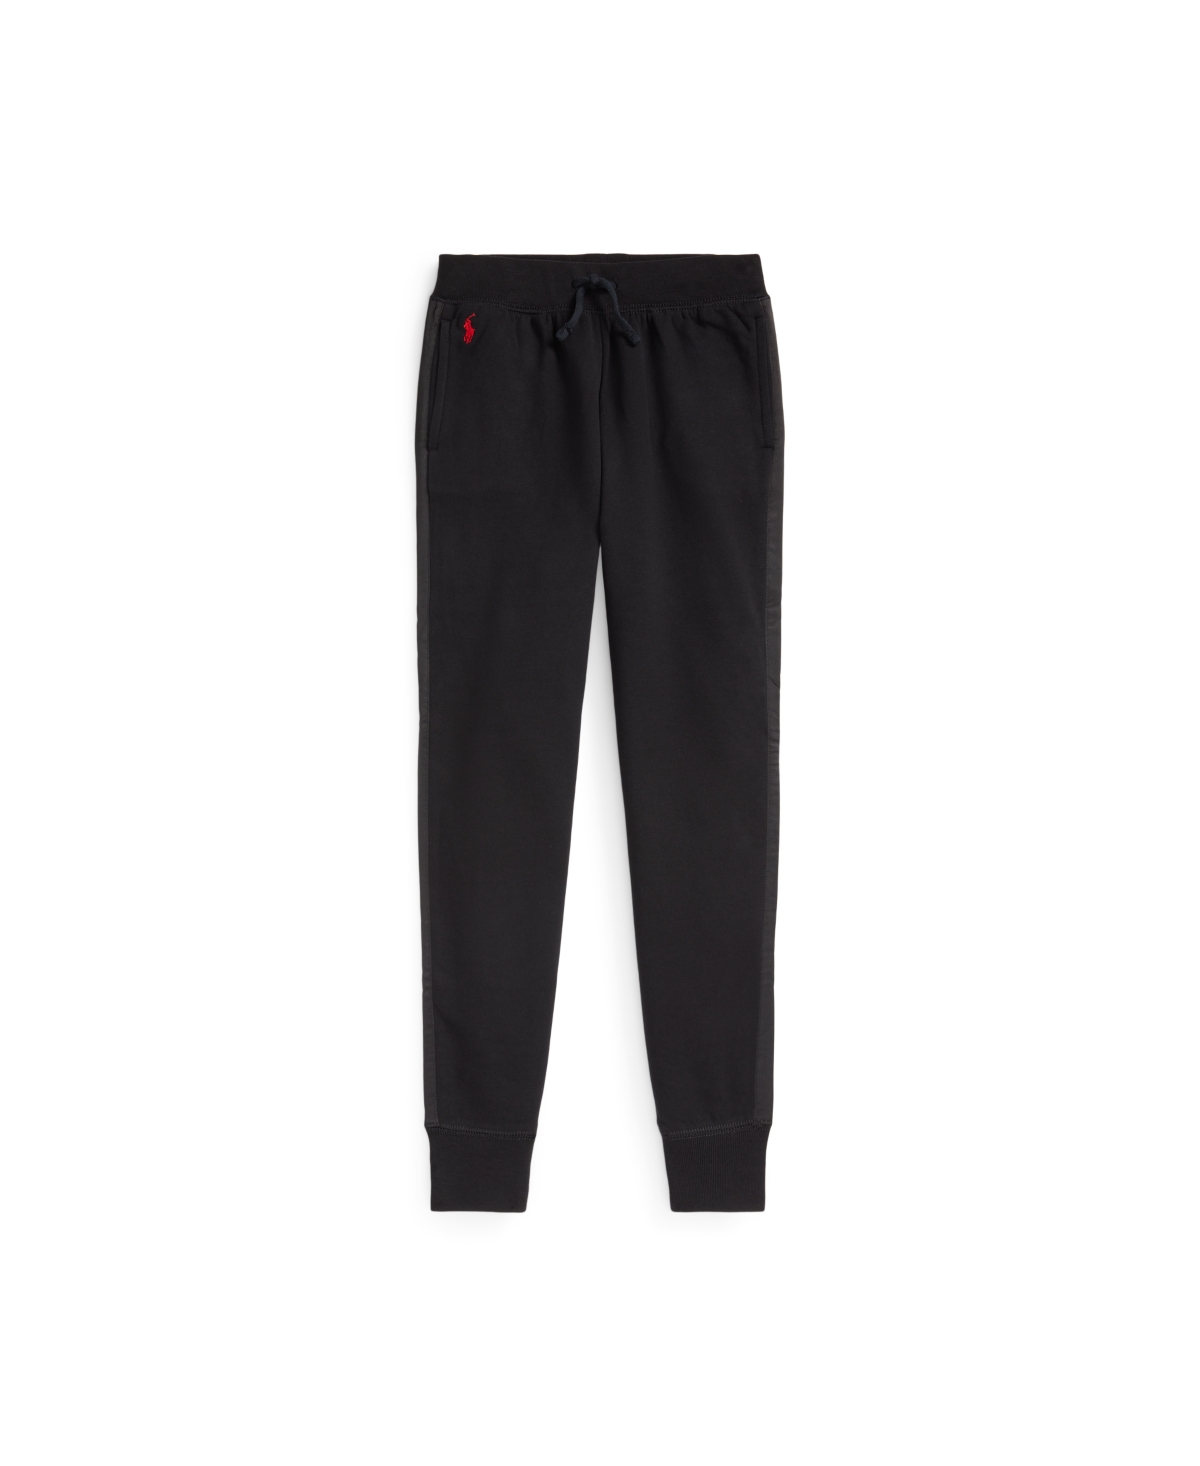 Polo Ralph Lauren Kids' Toddler And Little Girls Satin-striped Fleece Jogger Pants In Polo Black With Park Avenue Red